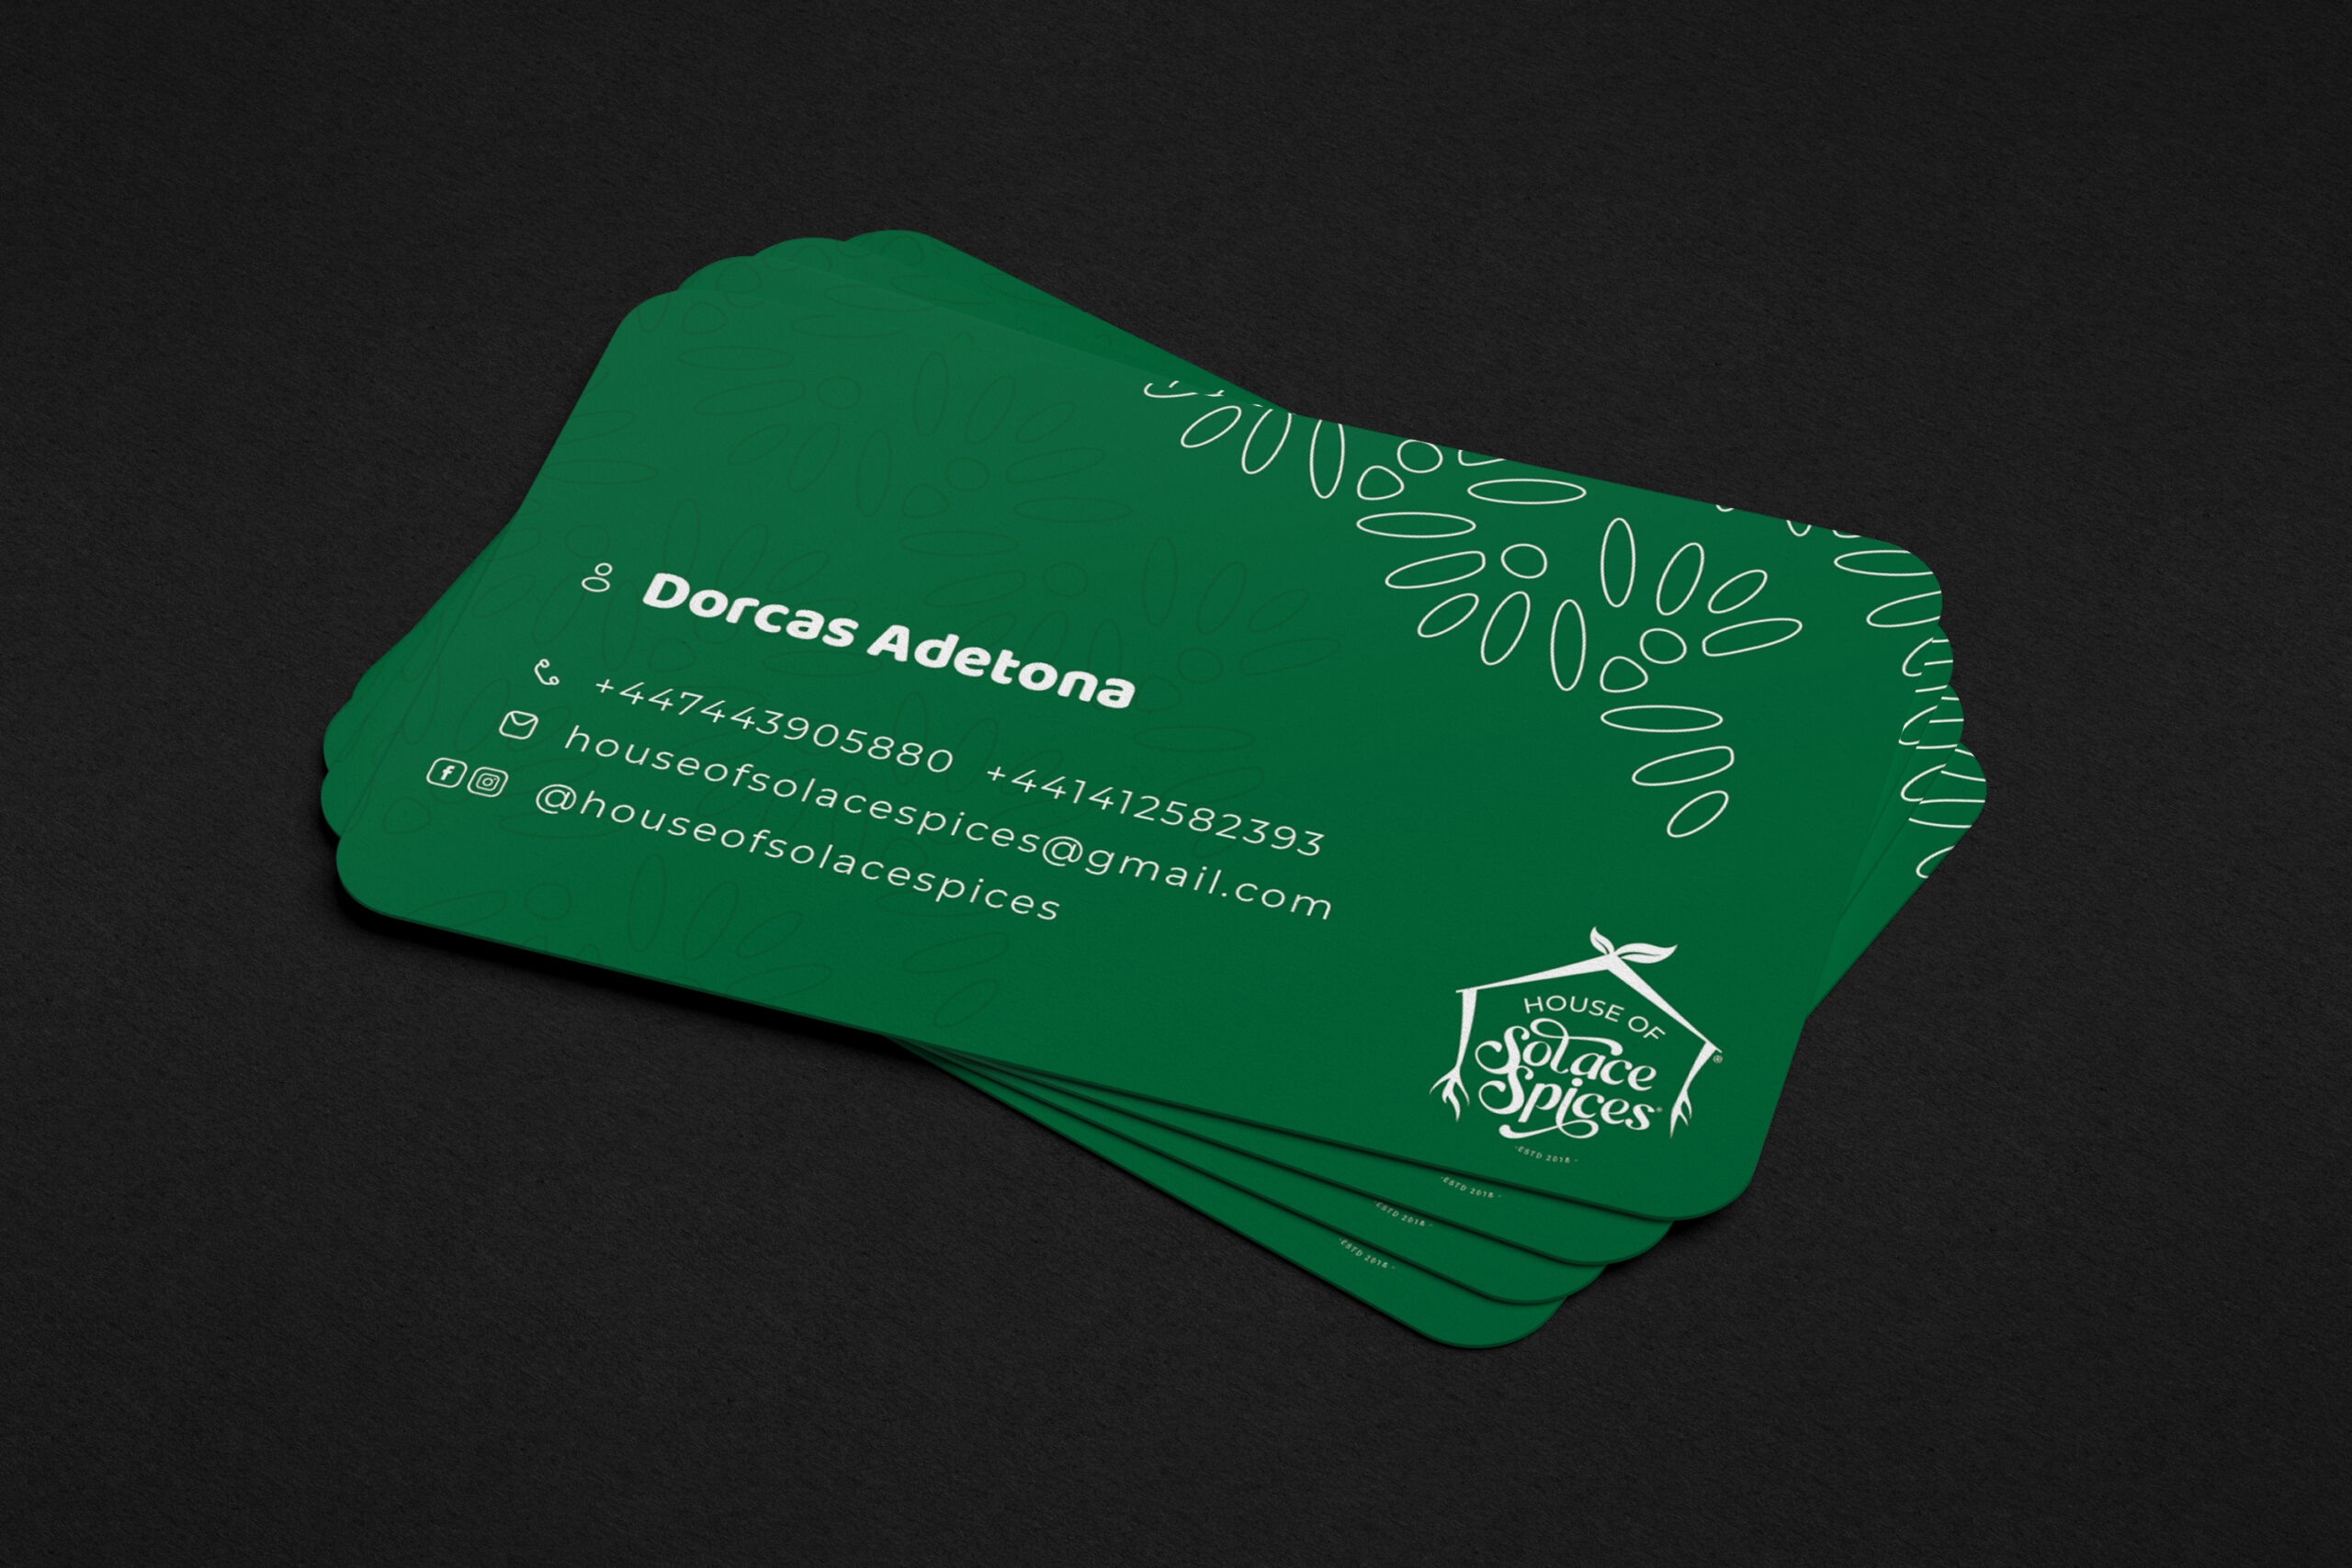 House-Of-Solace-Spices-Business-Card_Back-scaled